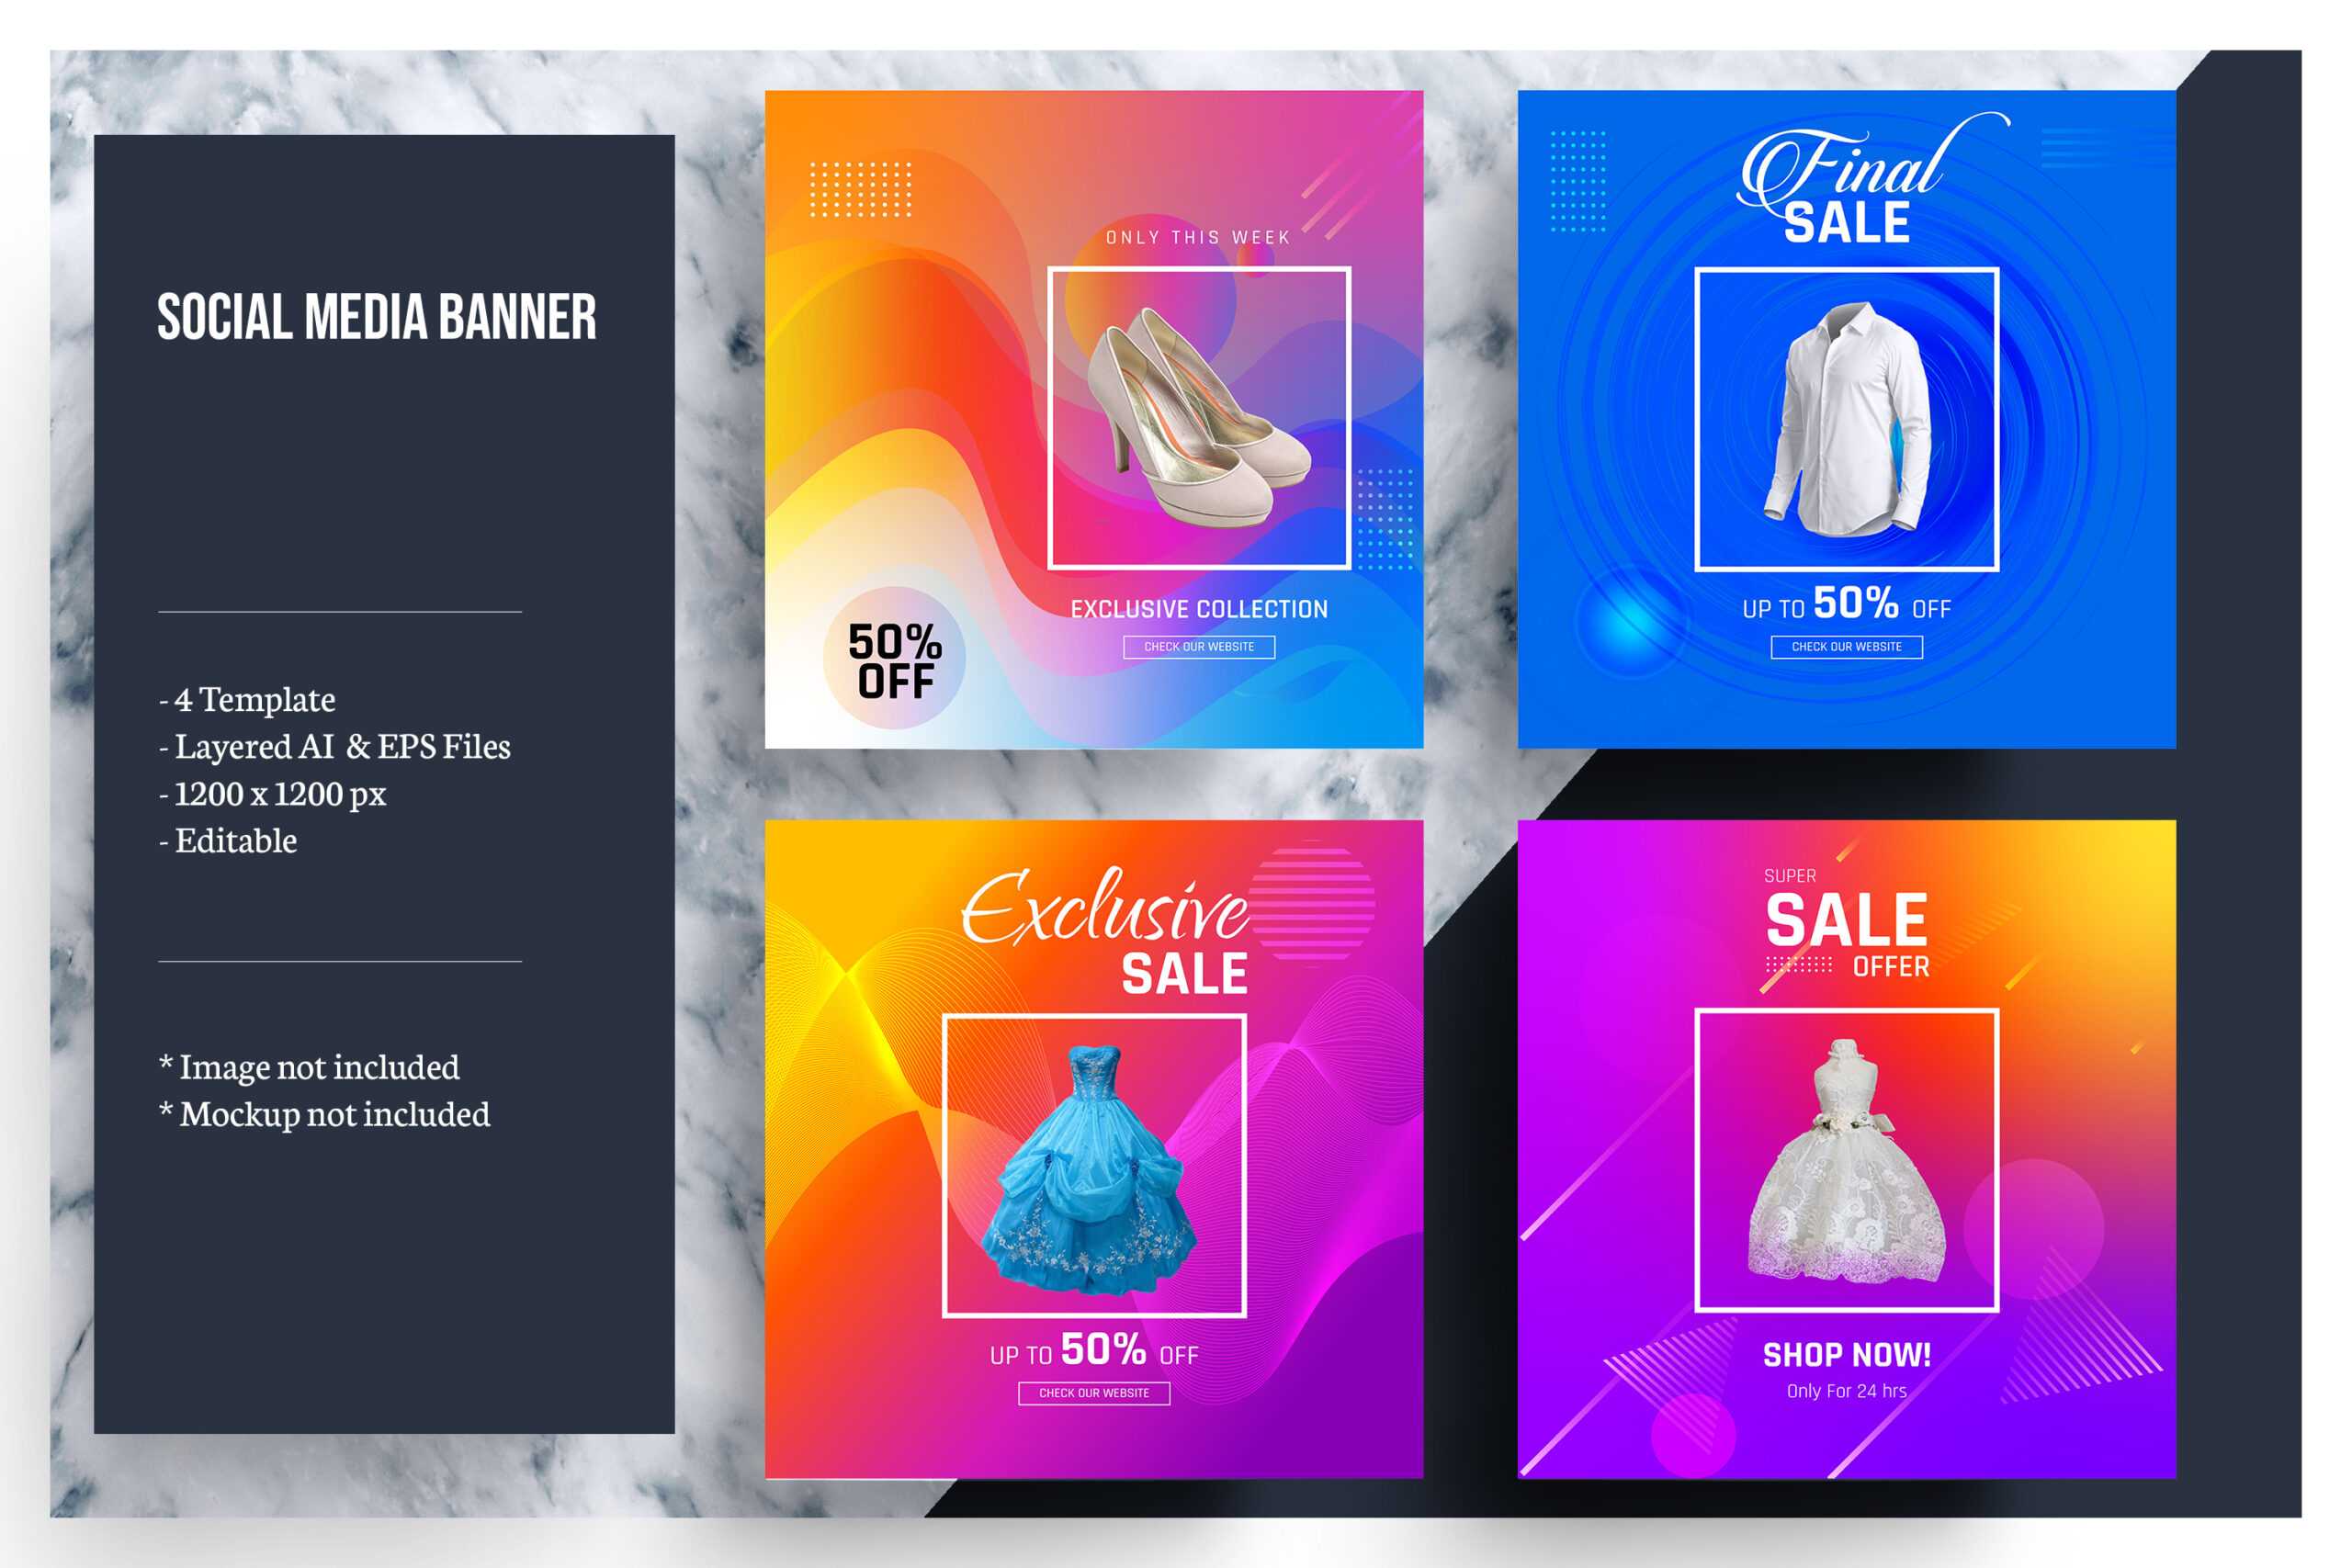 Colorful Social Media Banner Template With Regard To Product Banner Template